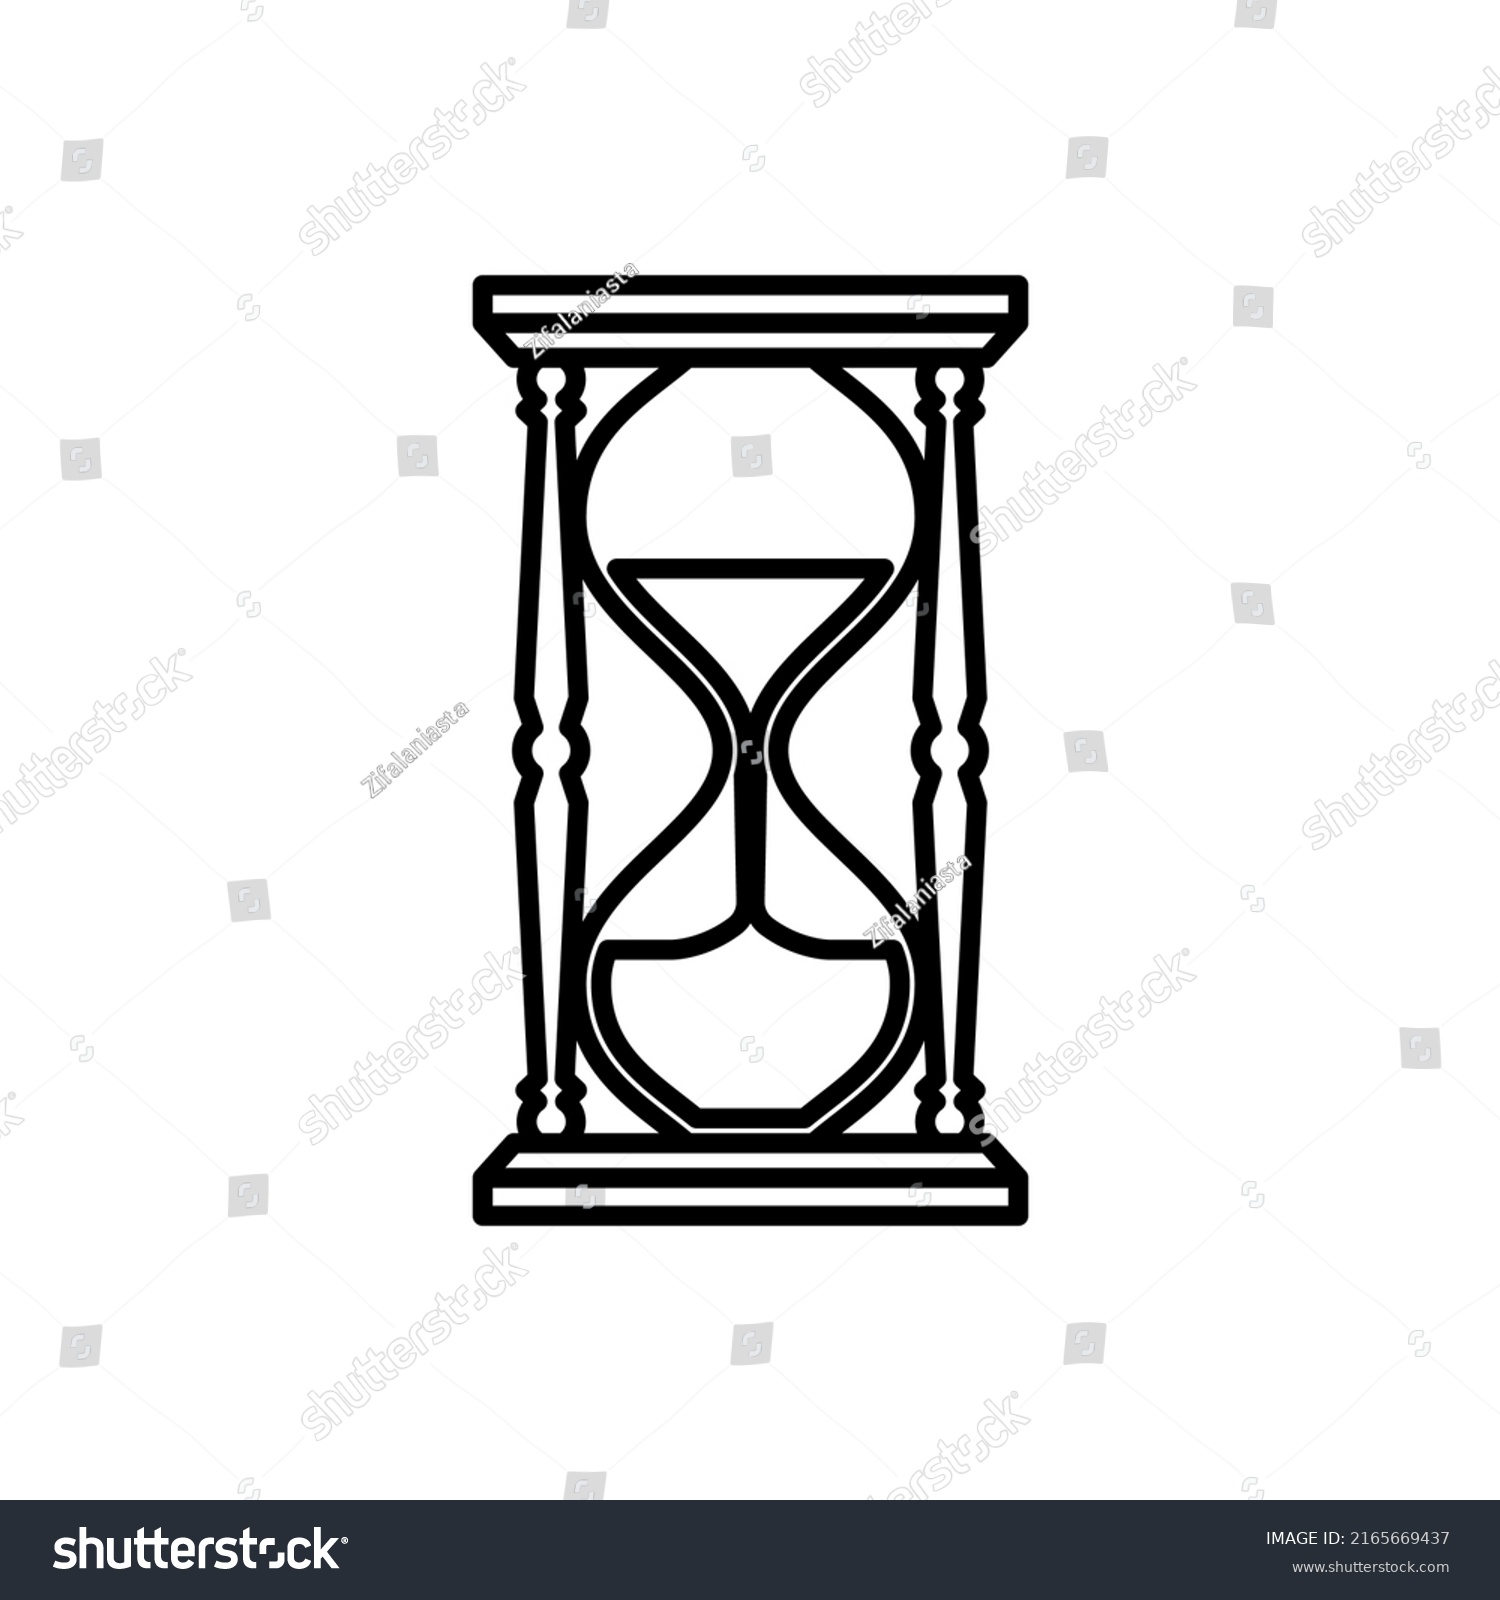 Vintage Hourglass Outline Illustration Vector Isolatedsand Stock Vector Royalty Free